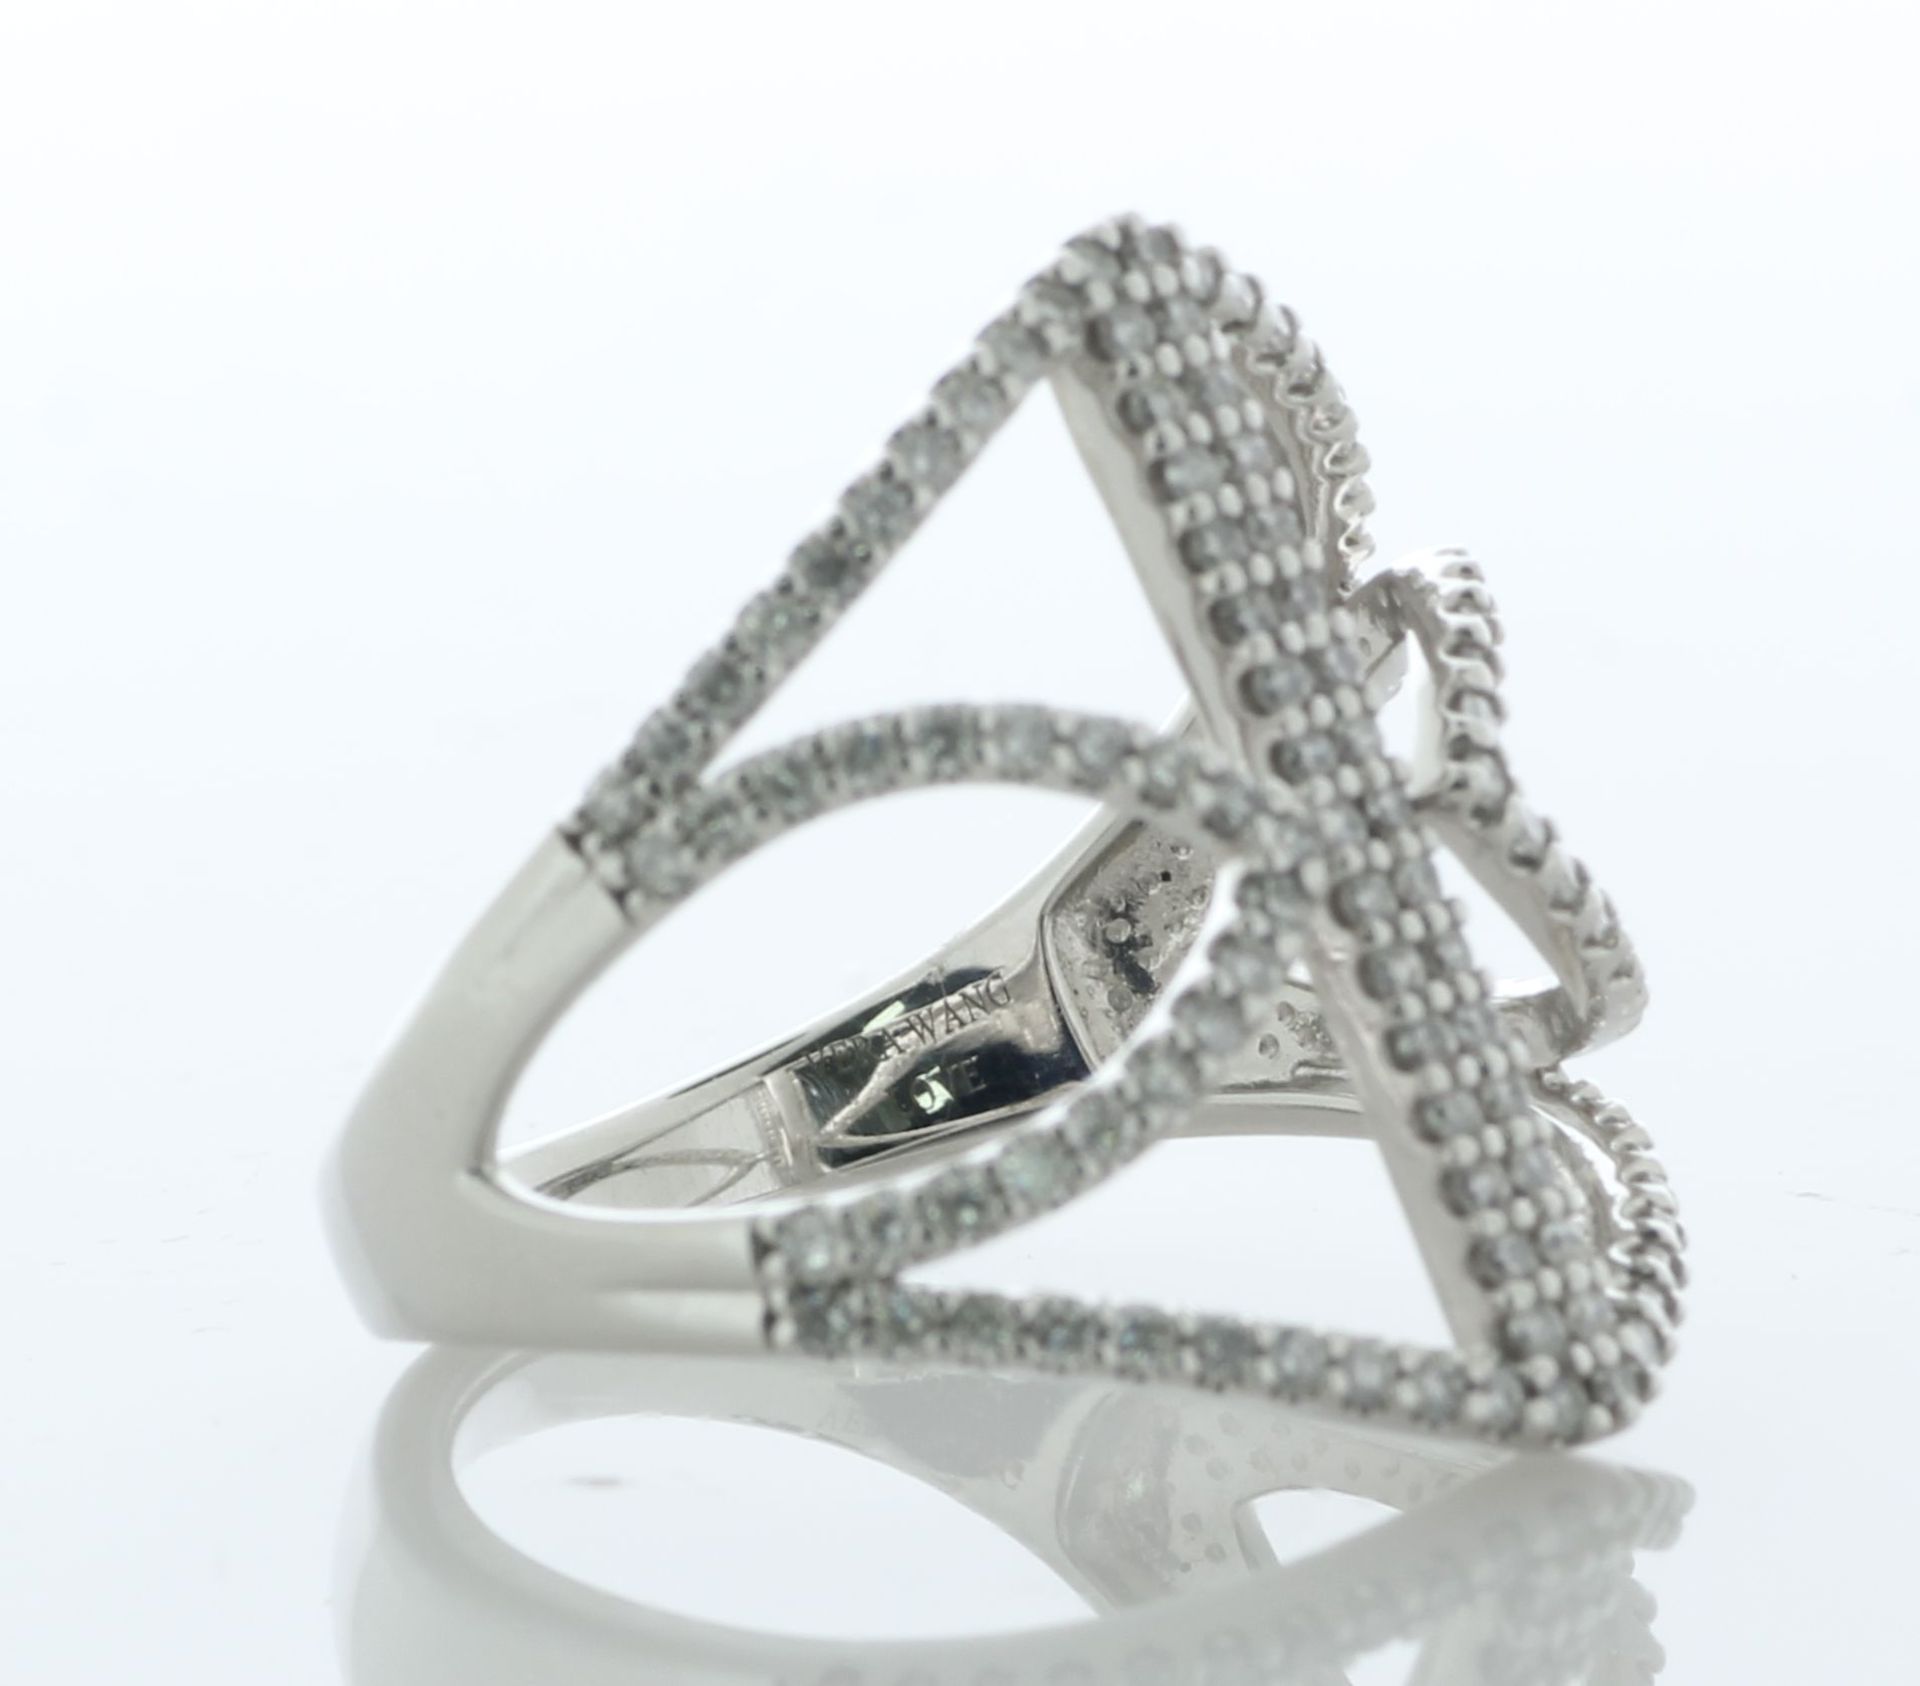 14ct White Gold Vera Wang Love Collection Diamond Ring 1.00 Carats - Valued By AGI £4,995.00 - - Image 5 of 6